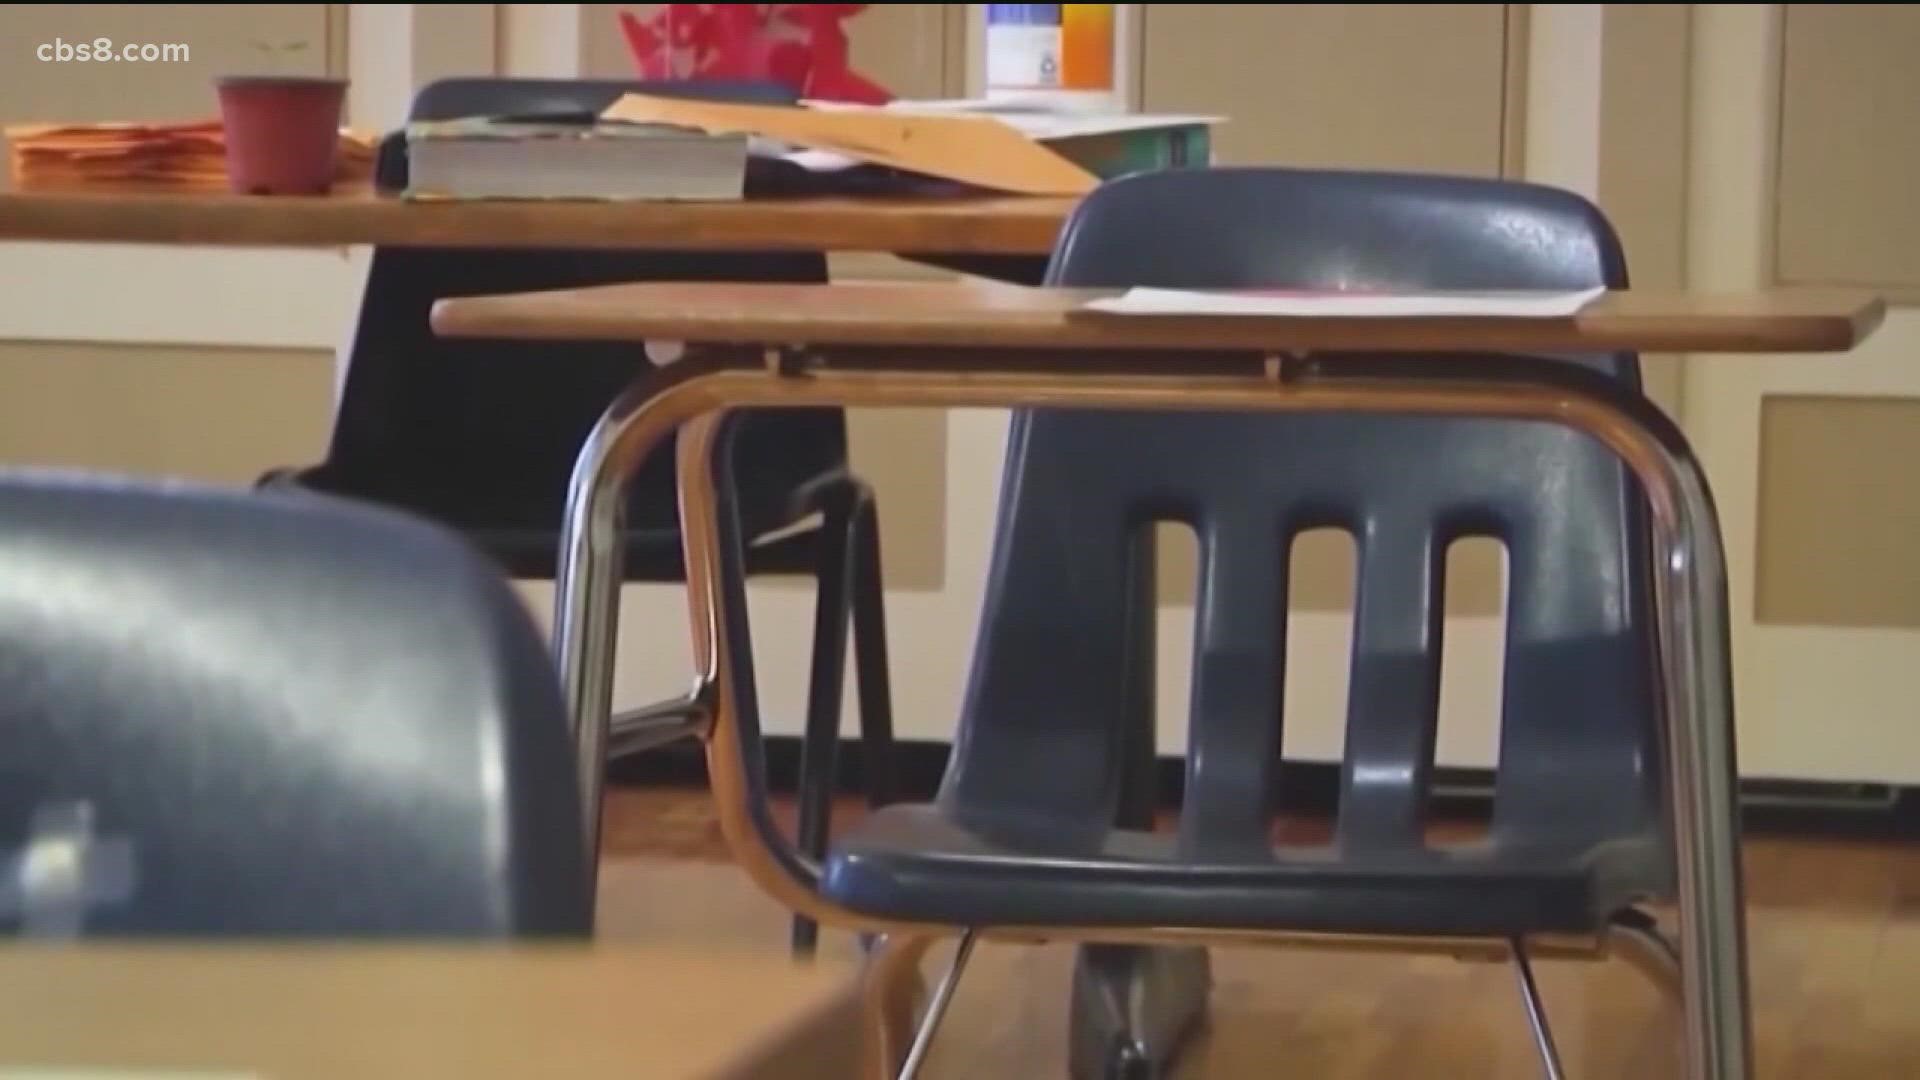 School districts are also set to lose state funding based on post-pandemic student attendance.